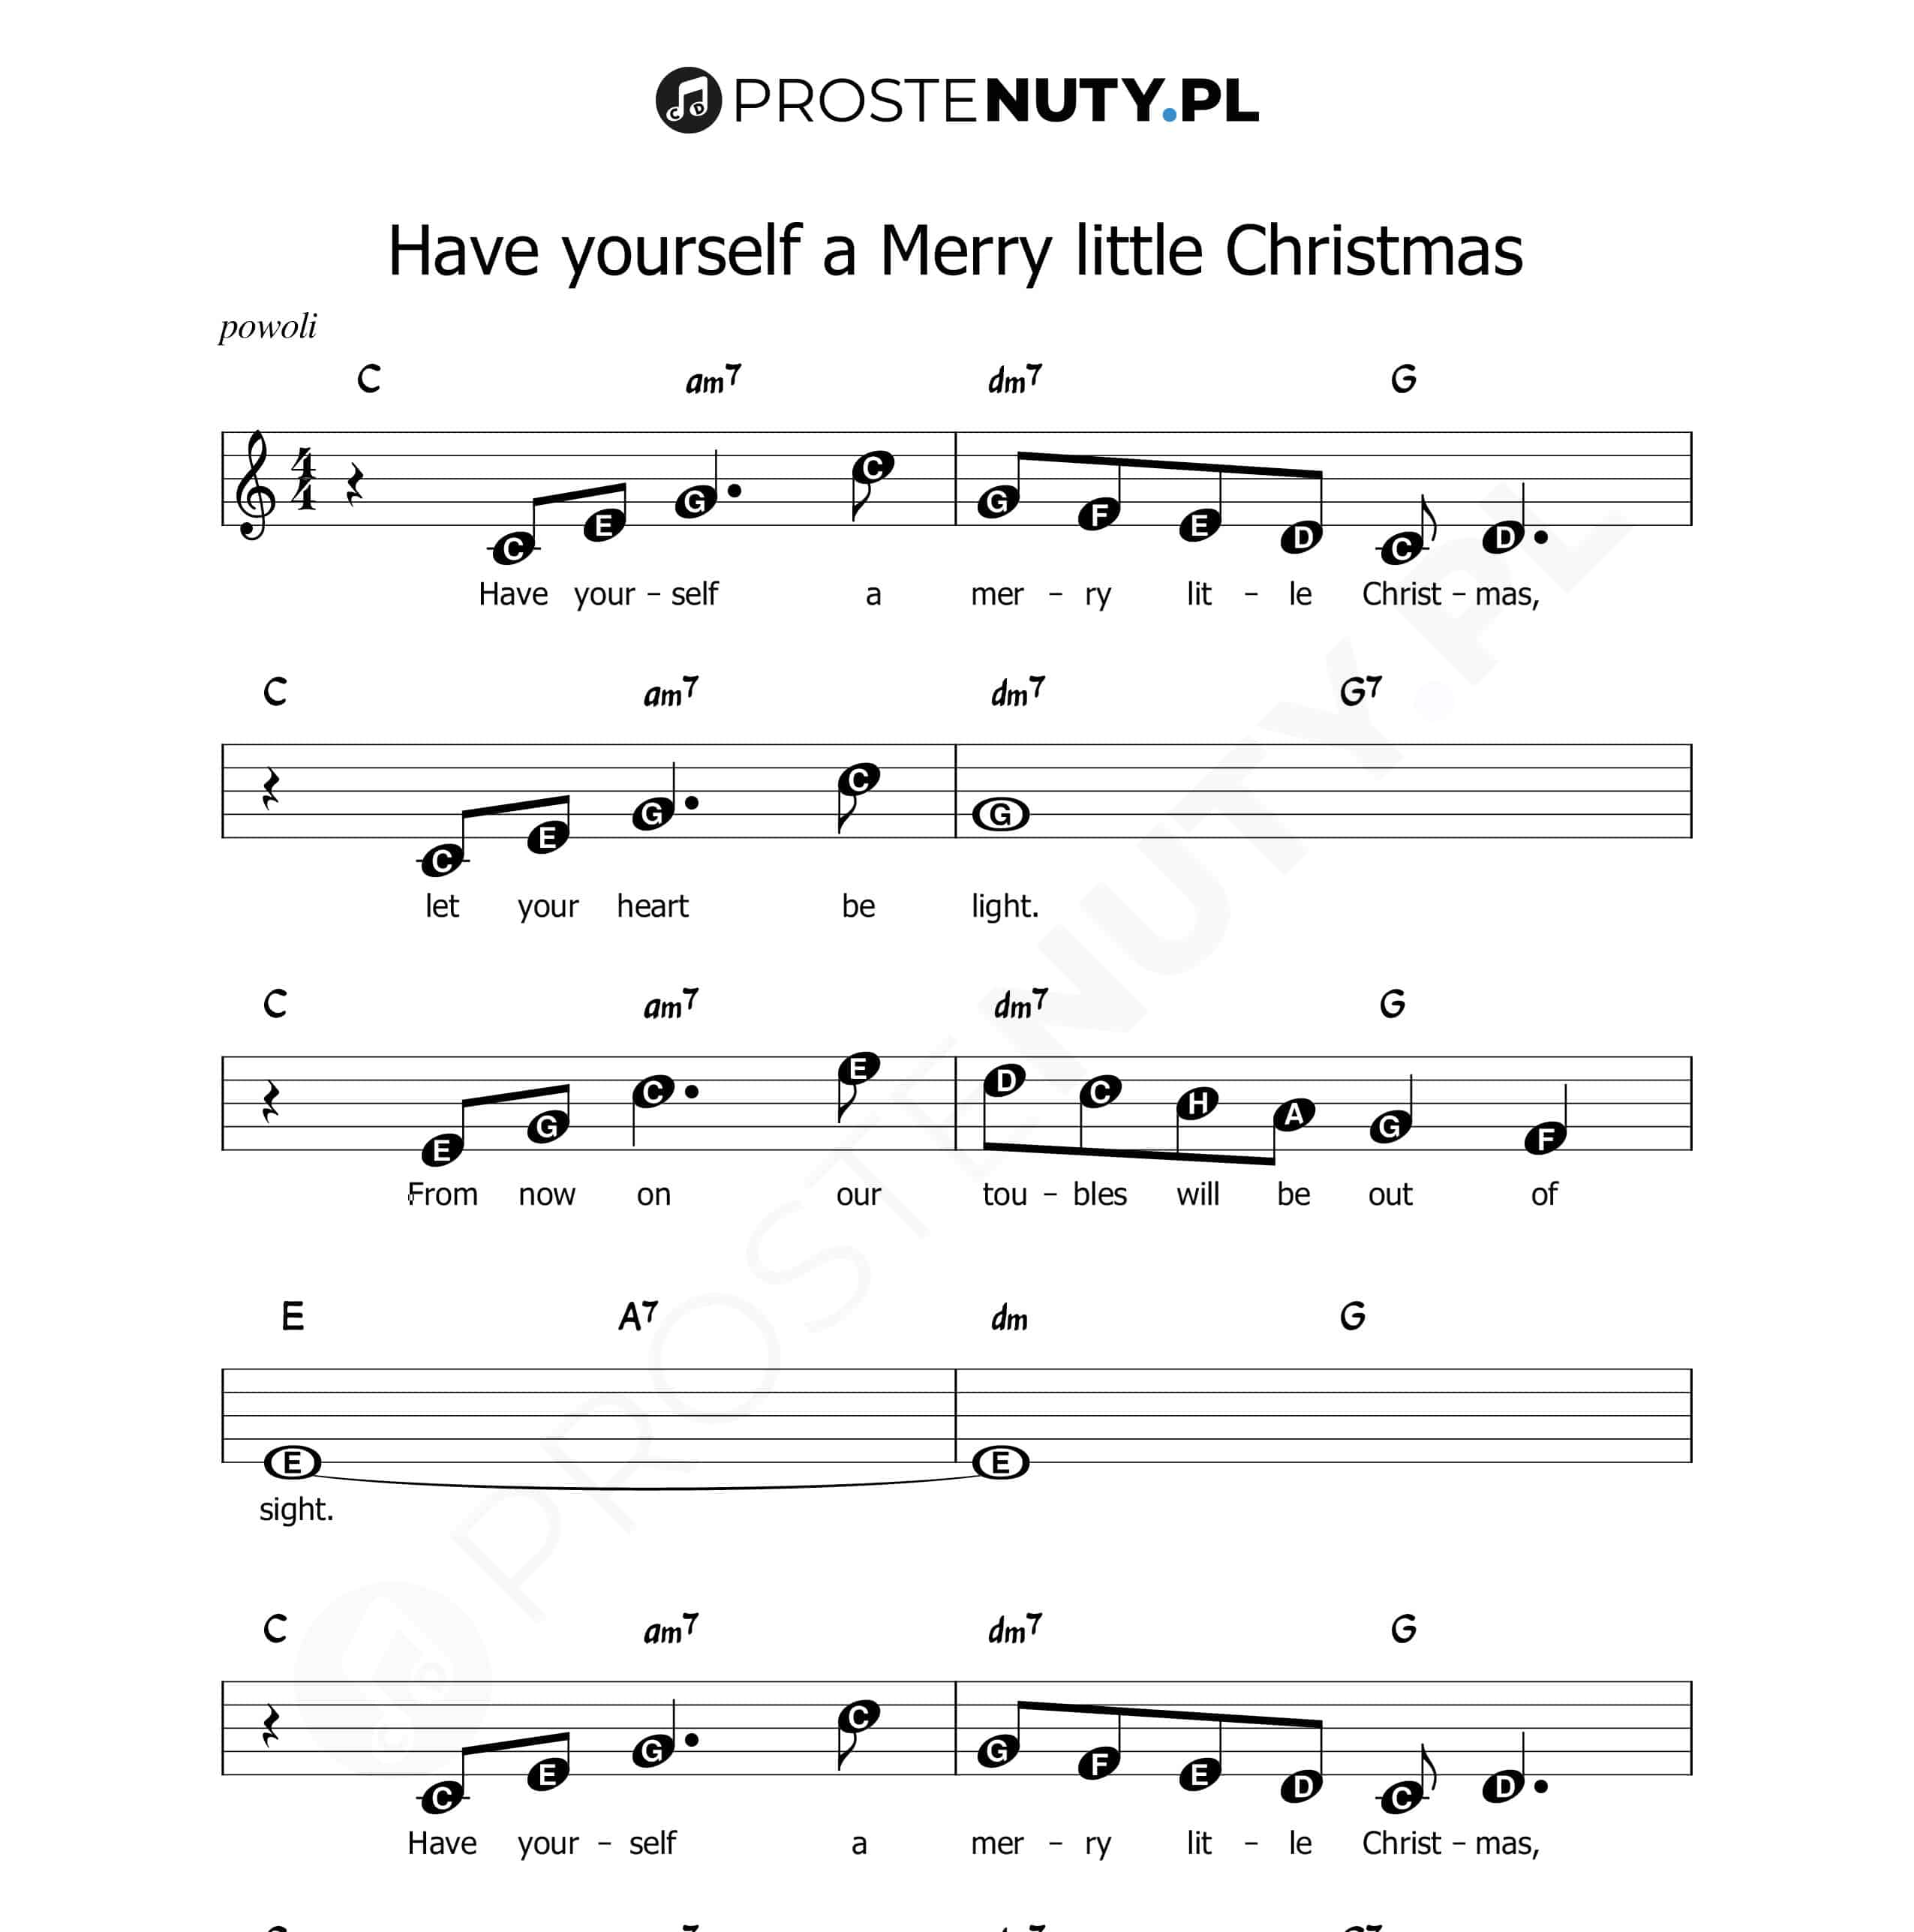 Have yourself a Merry little Christmas proste nuty